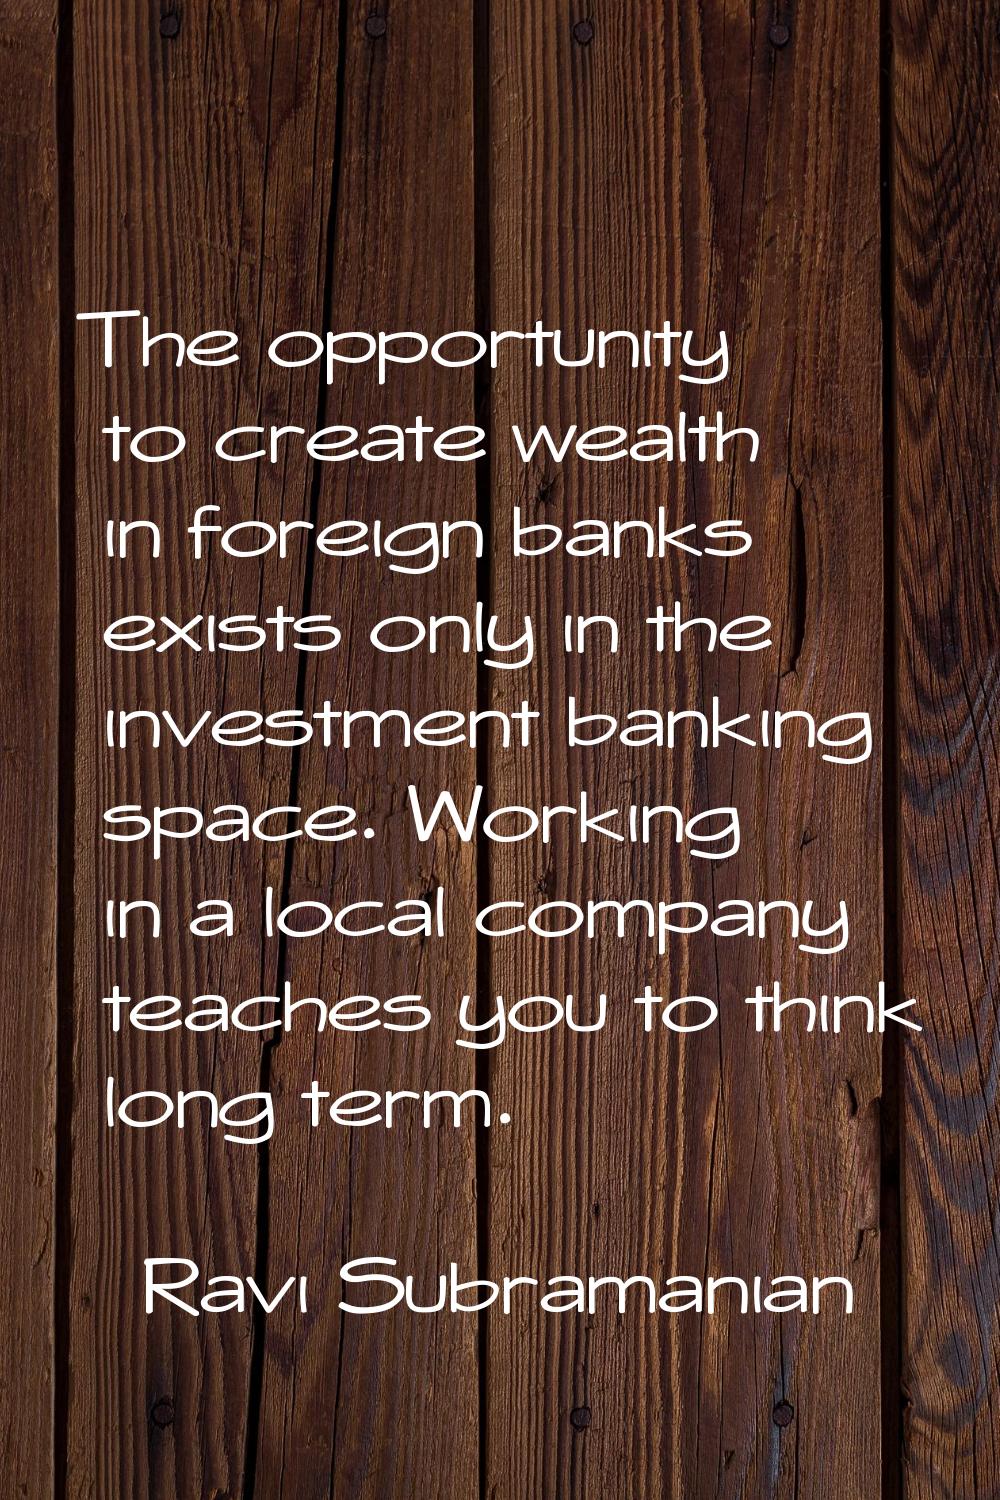 The opportunity to create wealth in foreign banks exists only in the investment banking space. Work